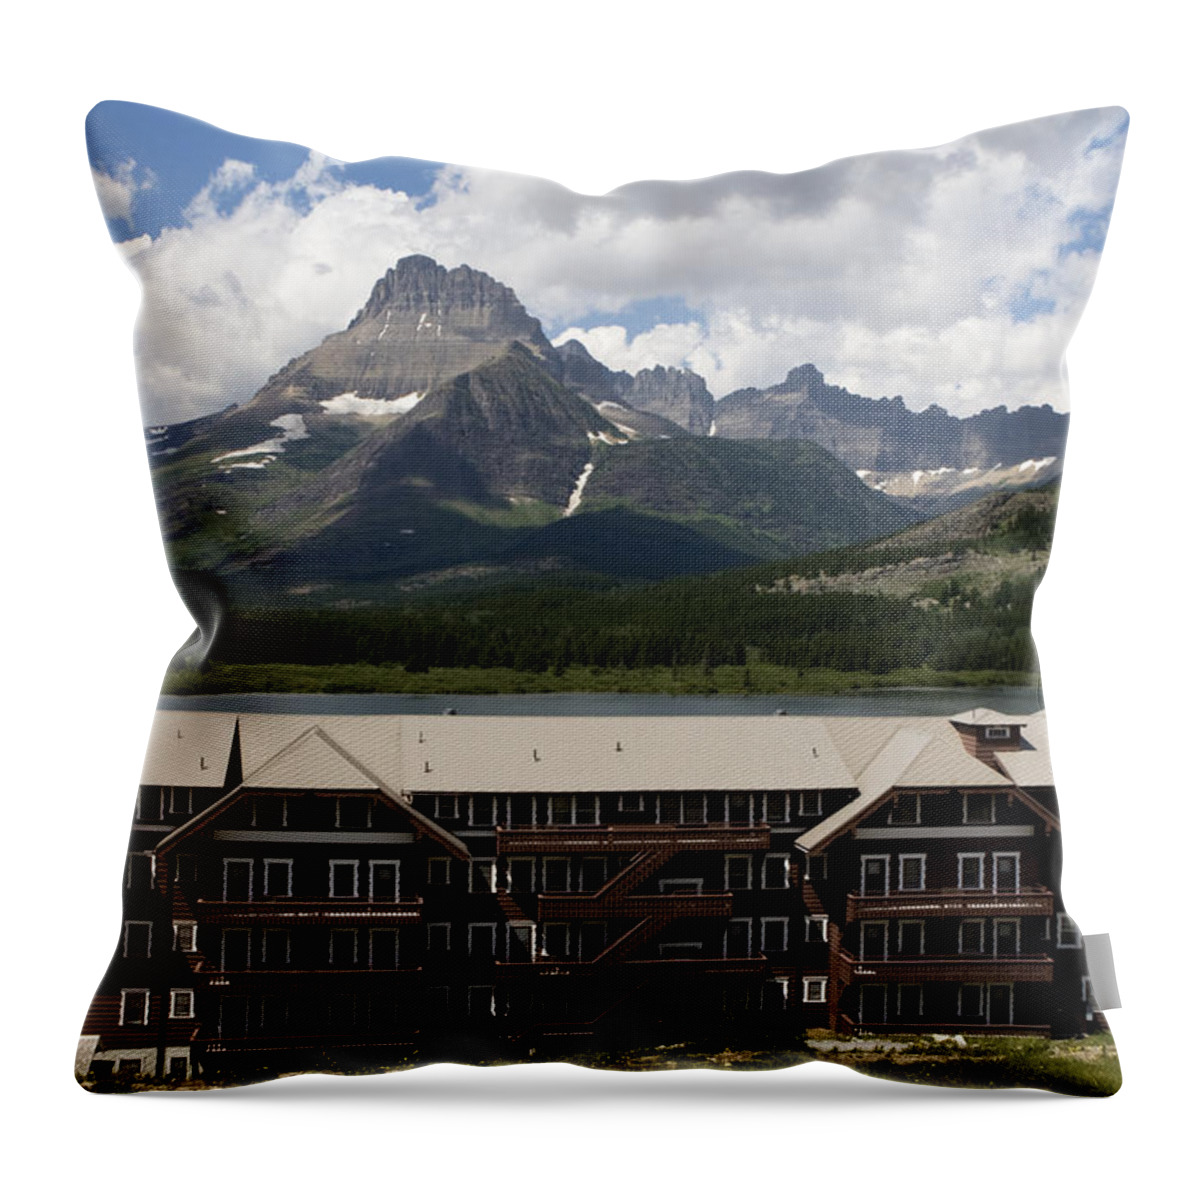 Many Glacier Lodge Throw Pillow featuring the photograph The Hills Are Alive by Lorraine Devon Wilke